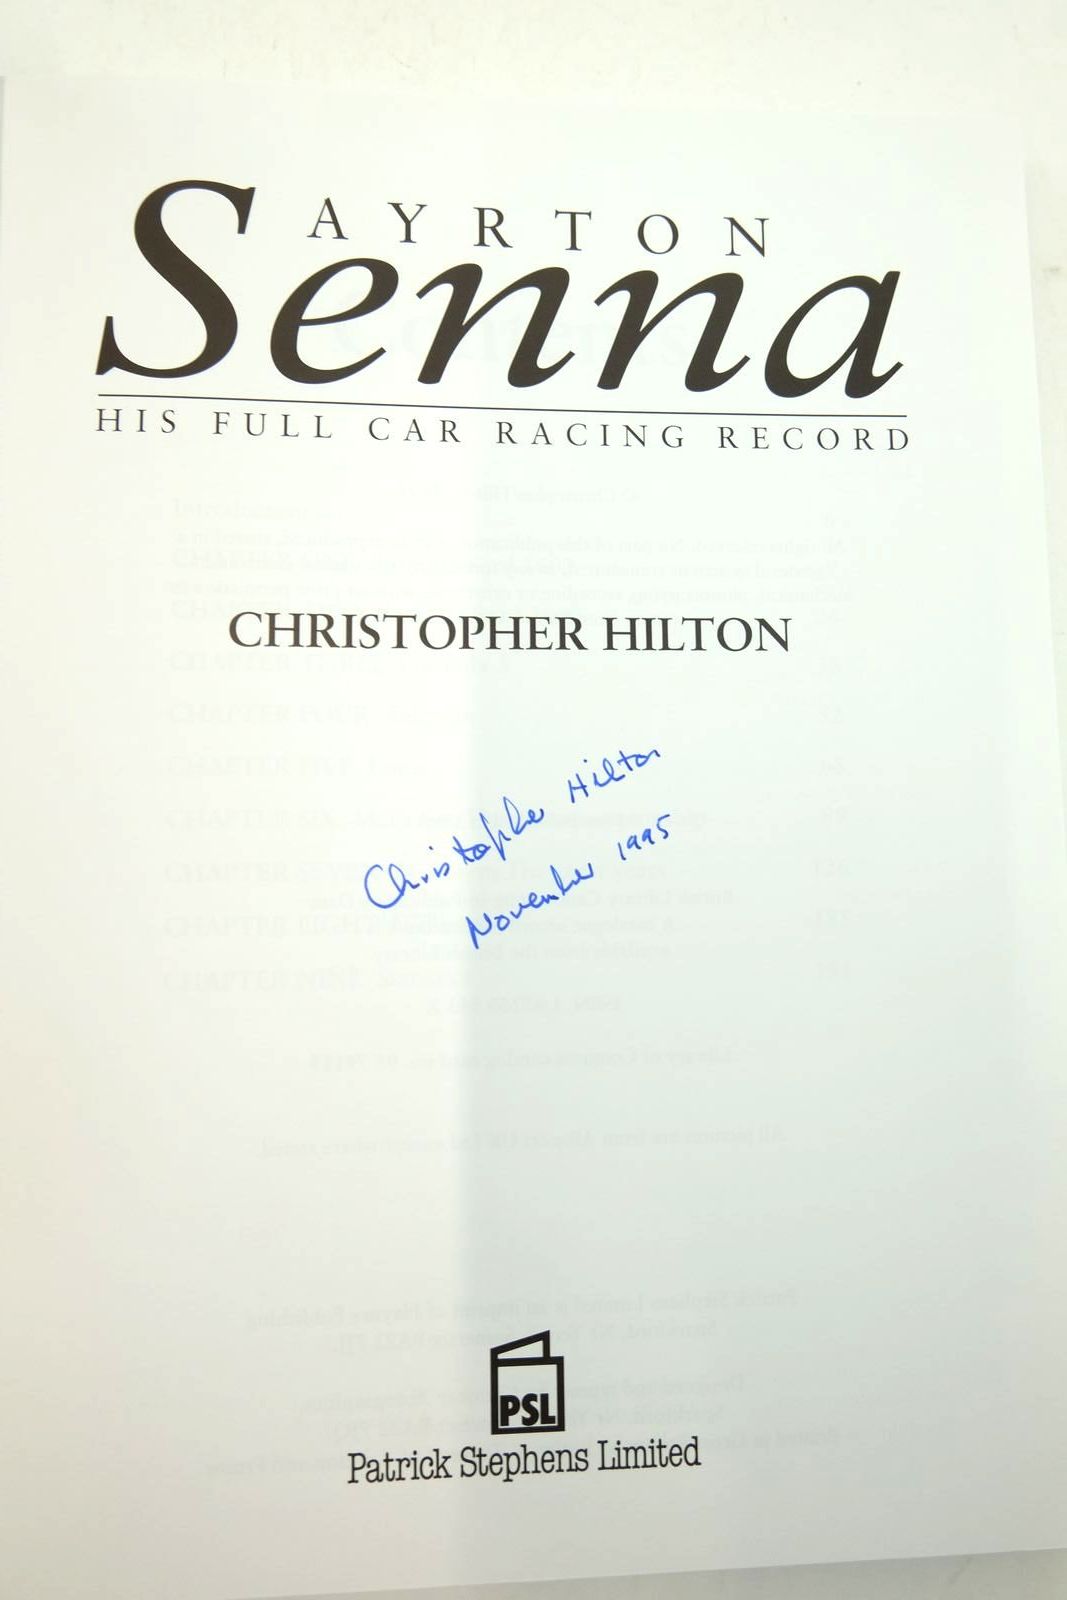 Photo of AYRTON SENNA: HIS FULL CAR RACING RECORD written by Hilton, Christopher published by Patrick Stephens Limited (STOCK CODE: 2139924)  for sale by Stella & Rose's Books